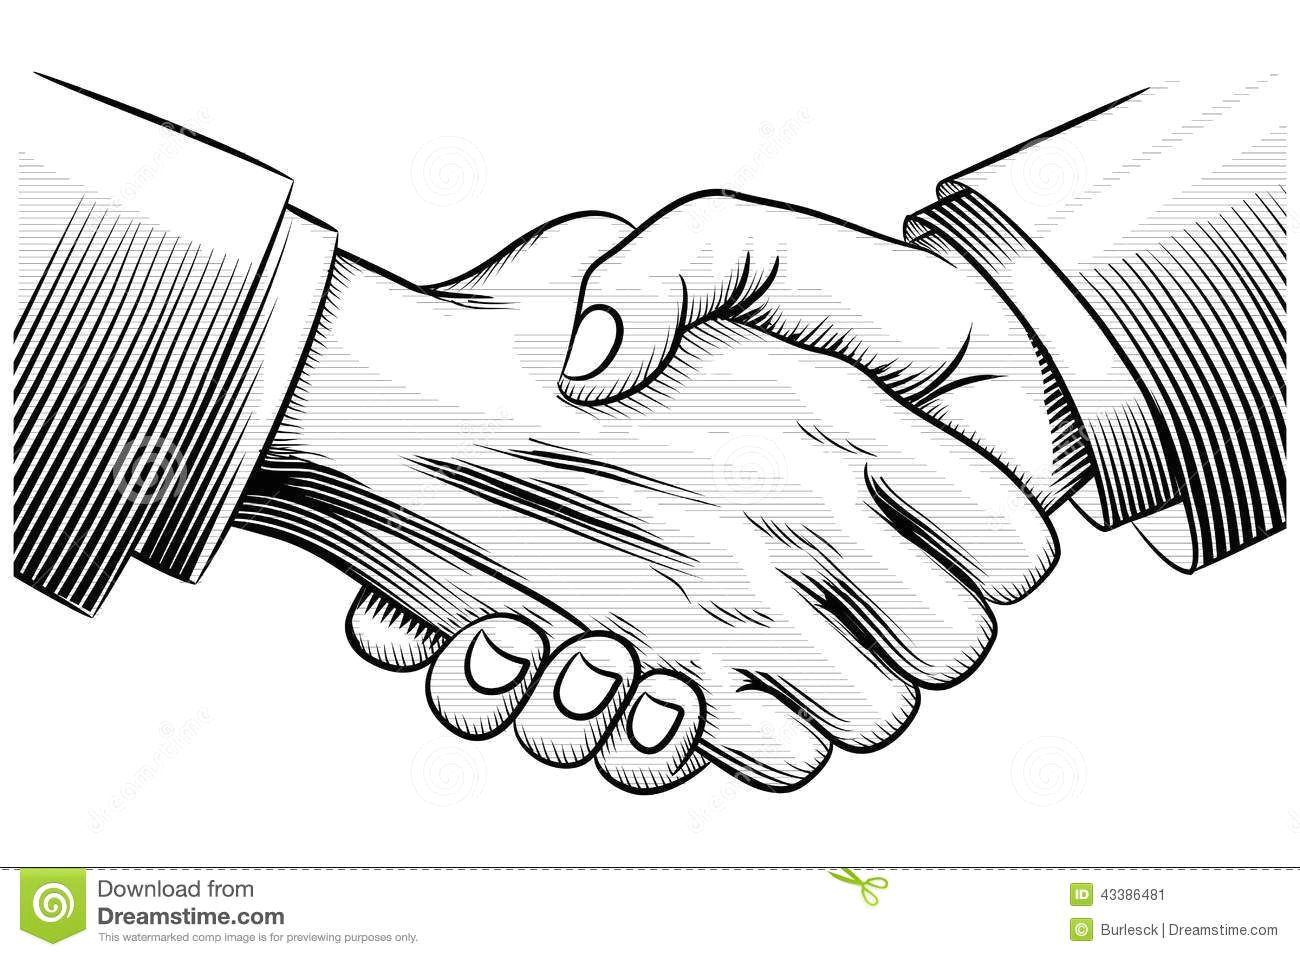 sketch handshake download from over 35 million high quality stock photos